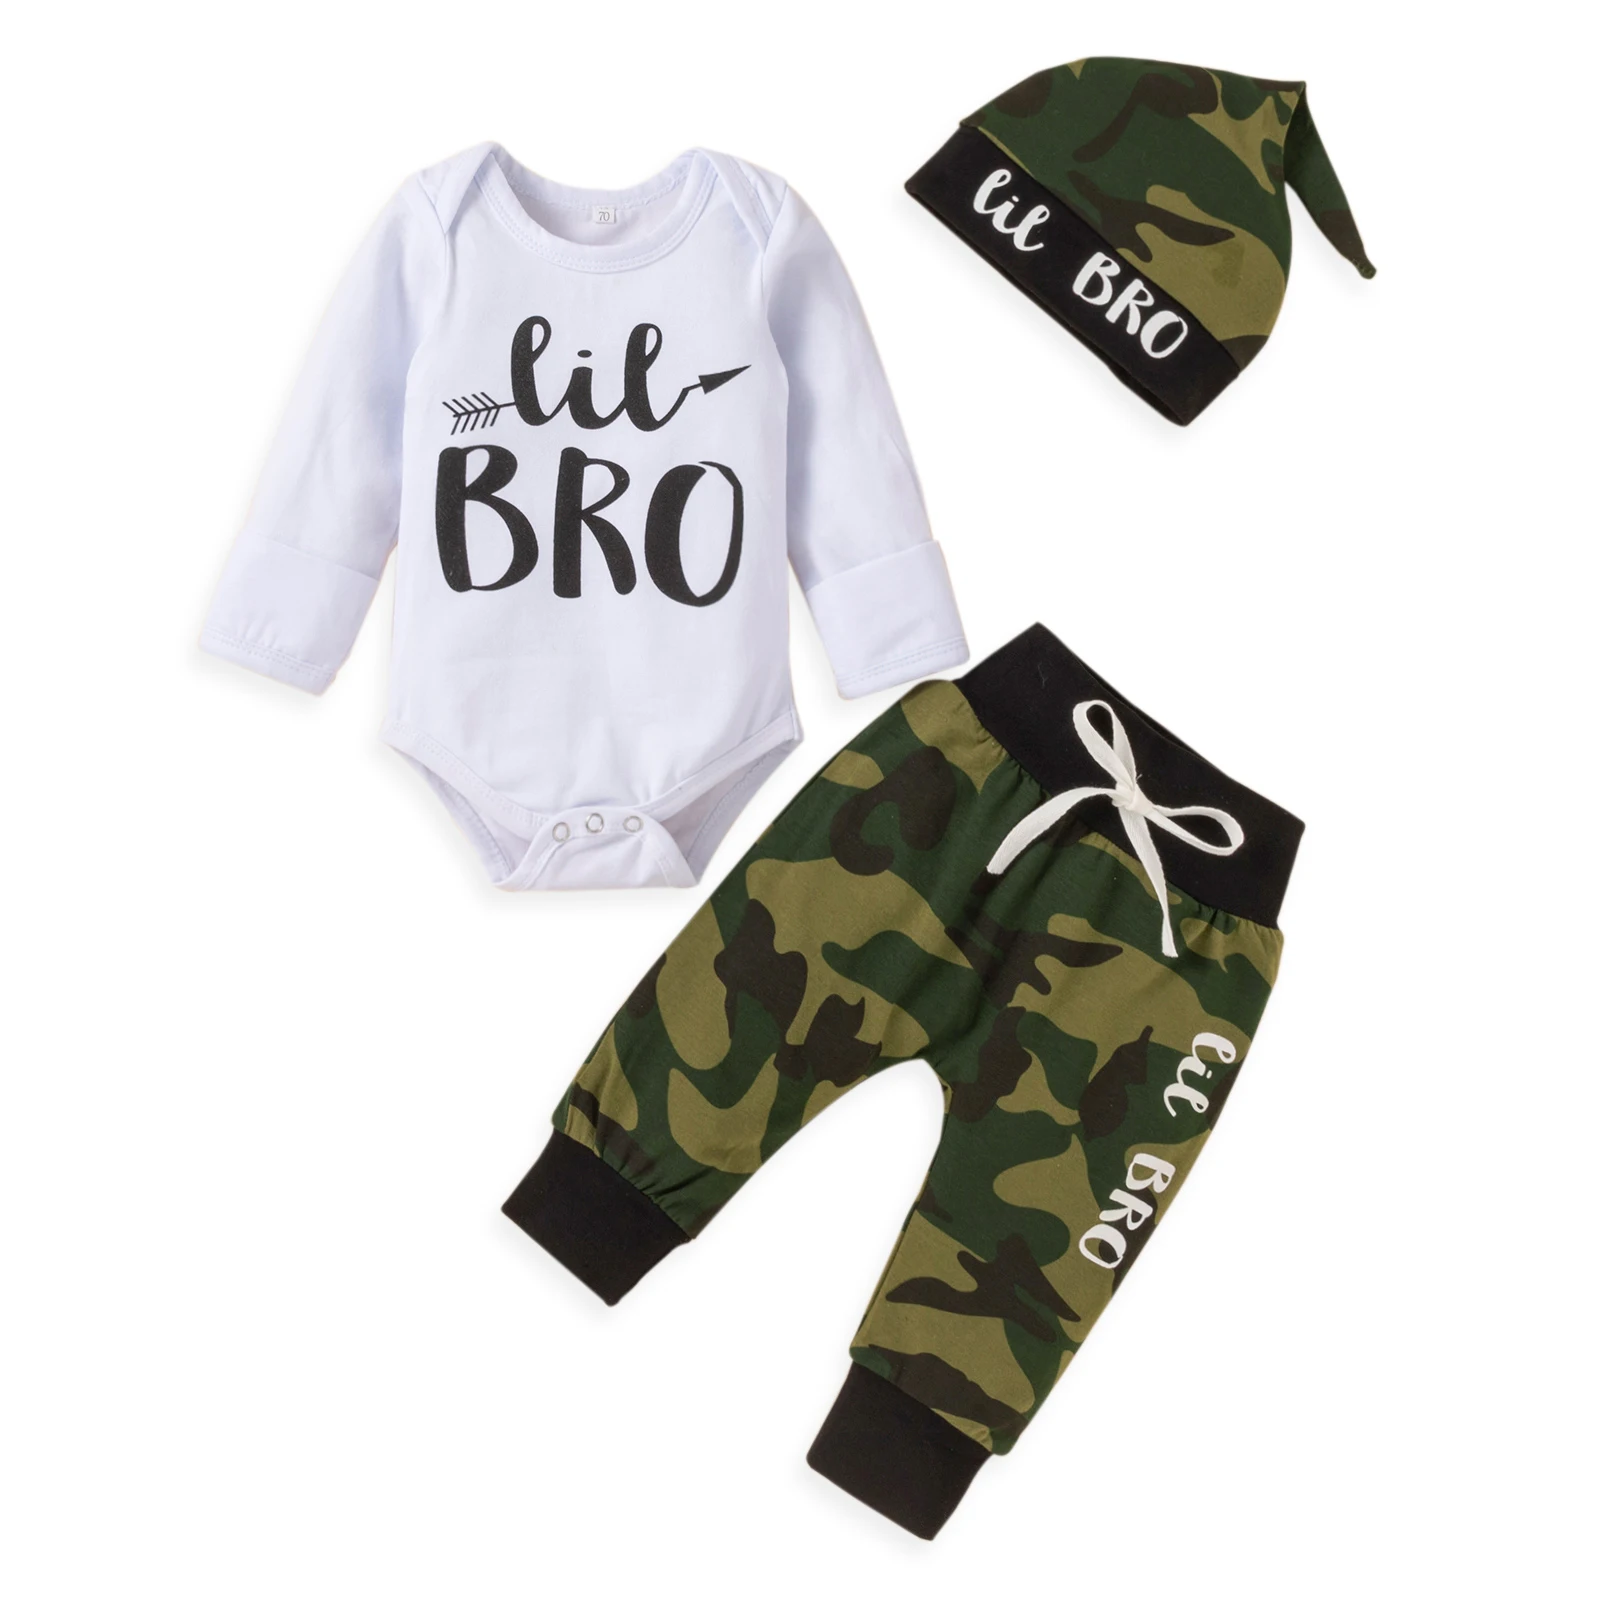 

Wholesale Baby Boy Boutique Clothing Sets New Born Baby Clothes Long Sleeve Cotton Baby Boys Romper Set, As color